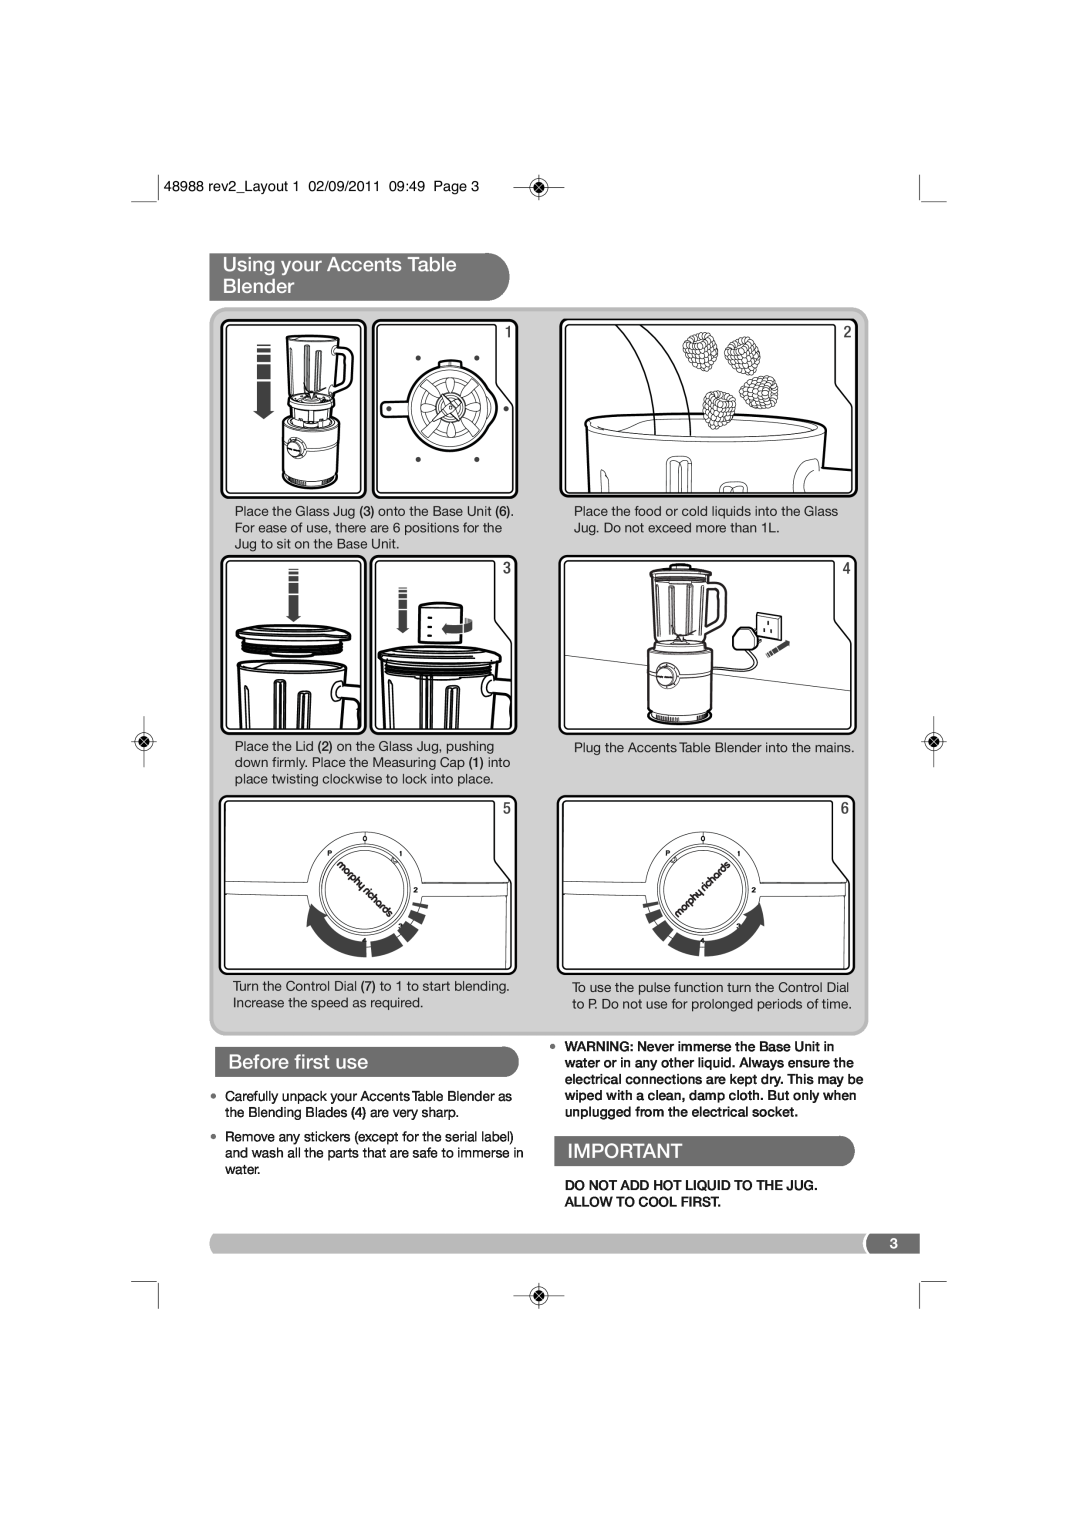 Morphy Richards FP48988 manual Using your Accents Table Blender, Before first use, 48988 rev2Layout 1 02/09/2011 0949 Page 